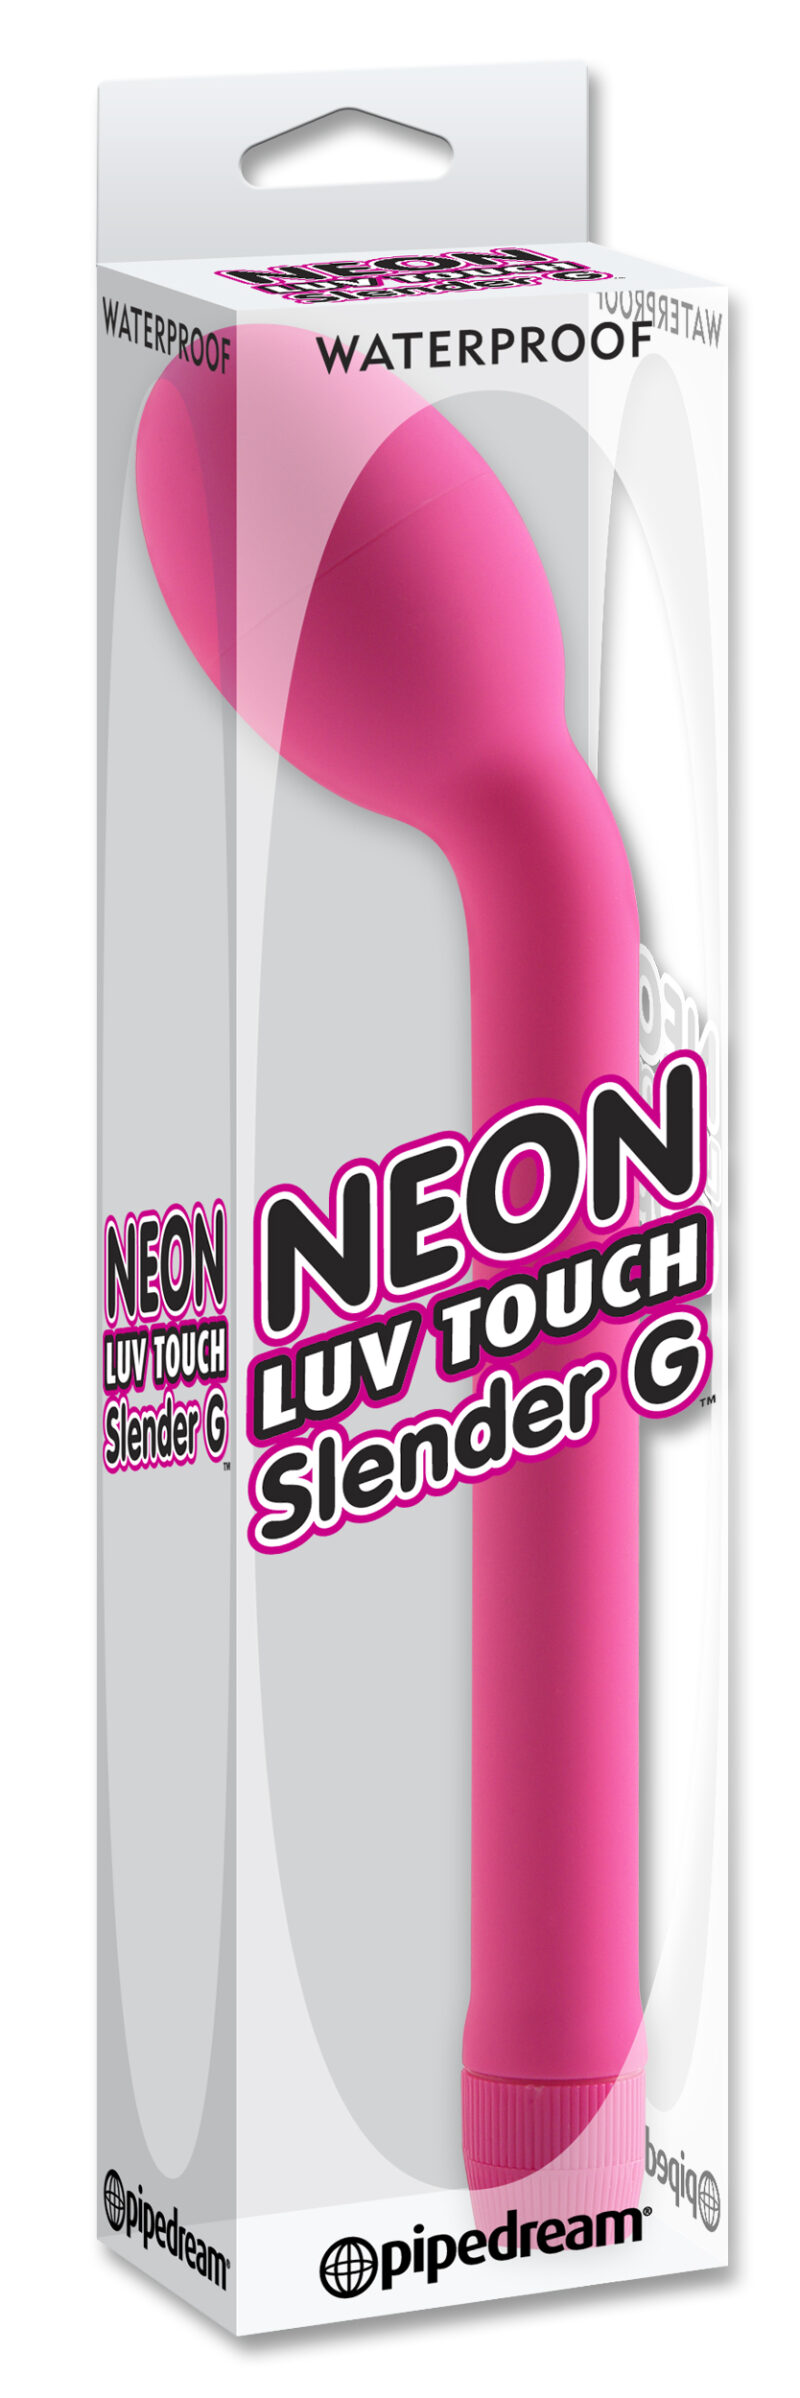 Pipedream Neon Luv Touch Slender G Vibrator Pink